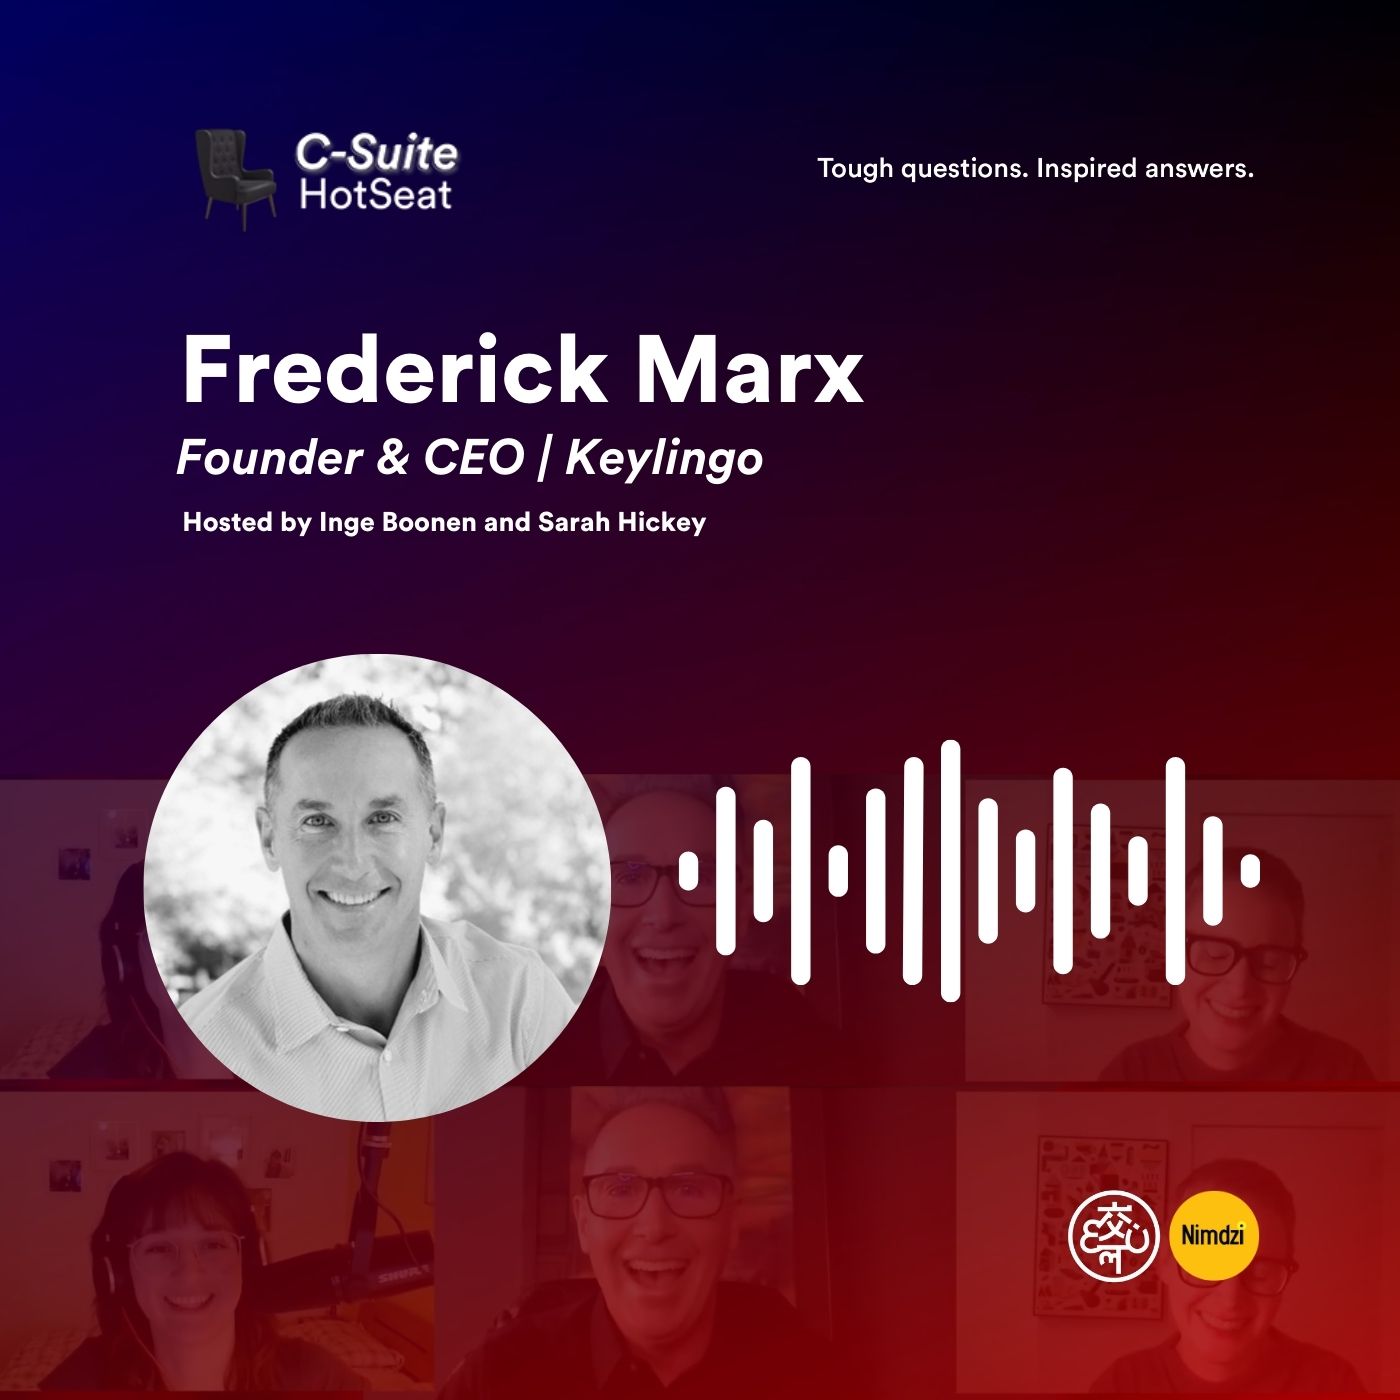 Being Chief Enthusiastic Officer with CEO Frederick Marx | C-Suite HotSeat E24